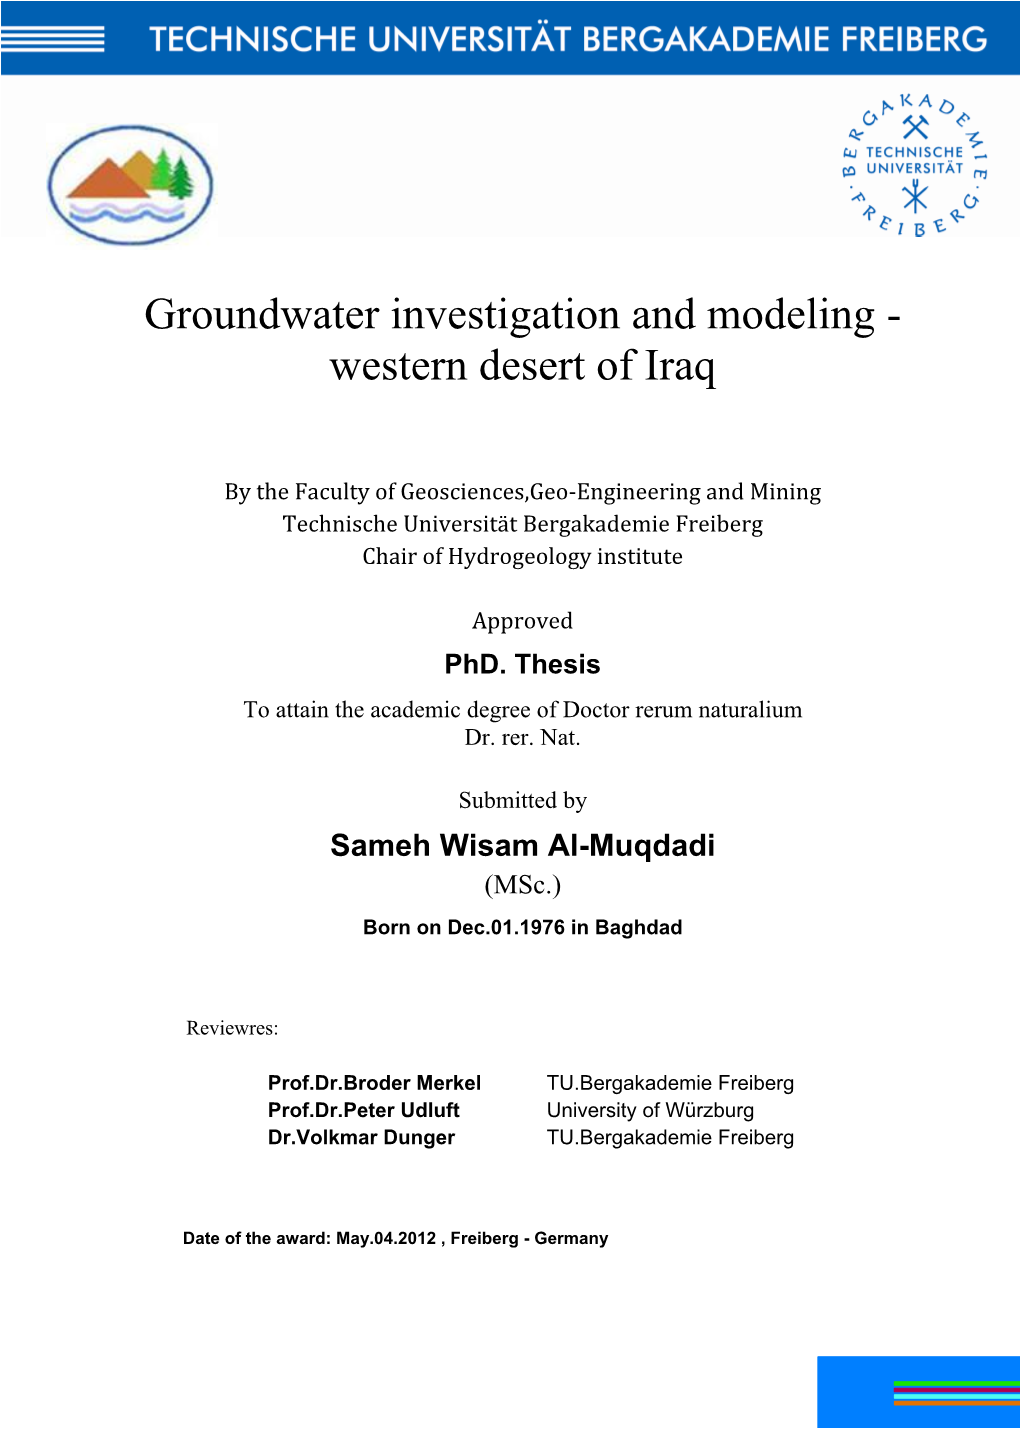 Groundwater Investigation and Modeling - Western Desert of Iraq